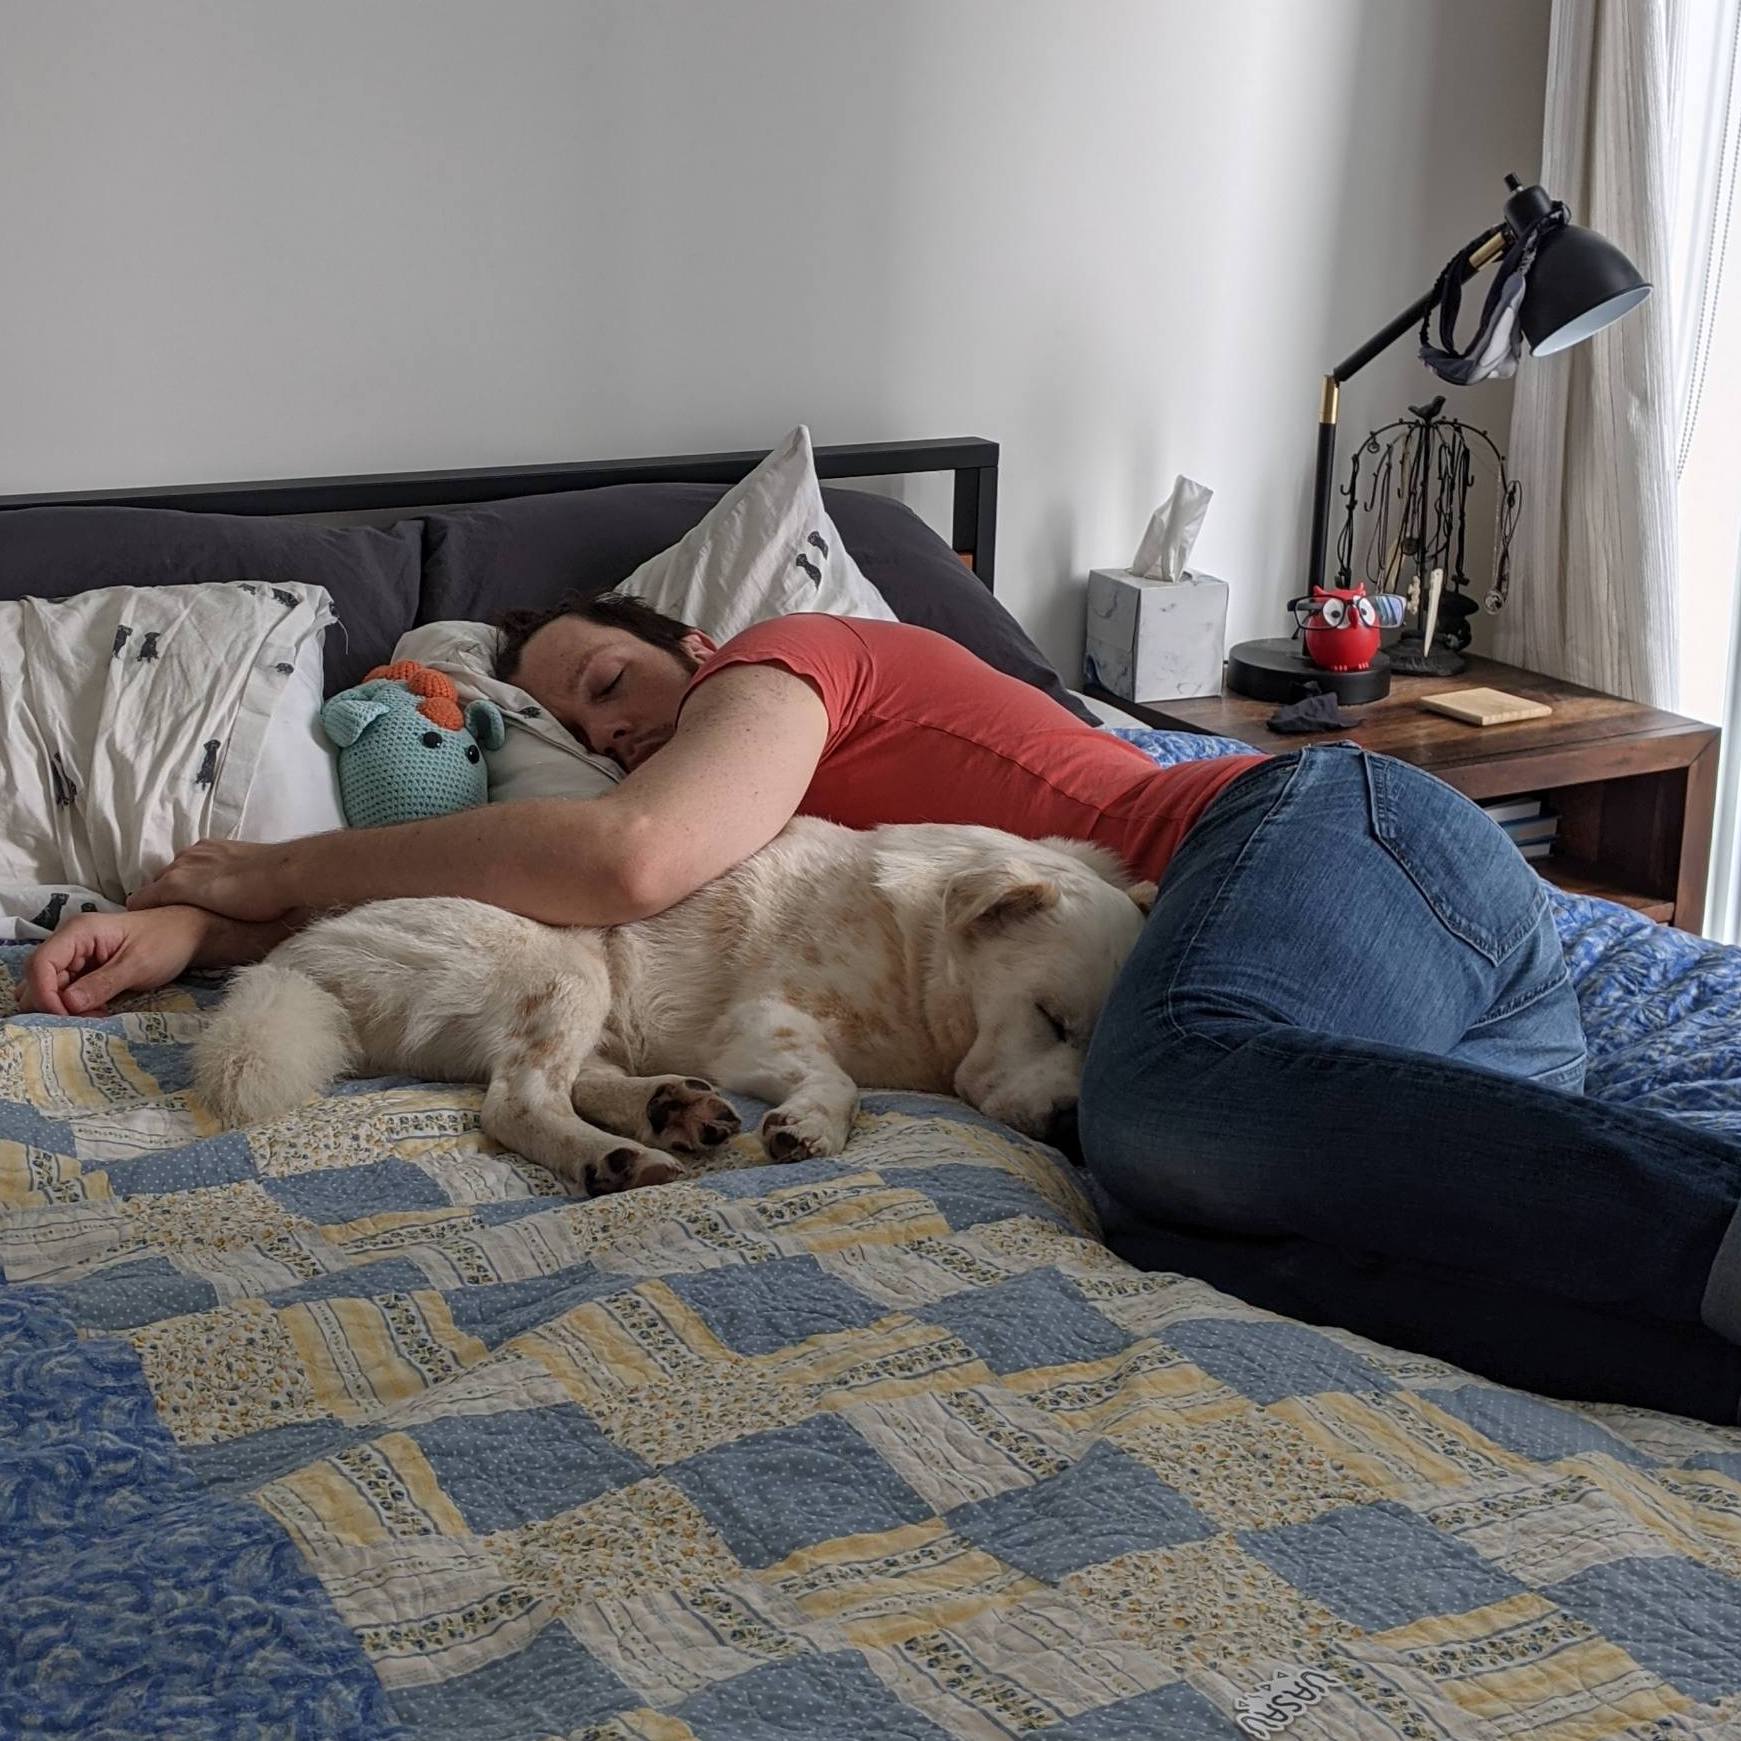 person and dog cuddling on a bed